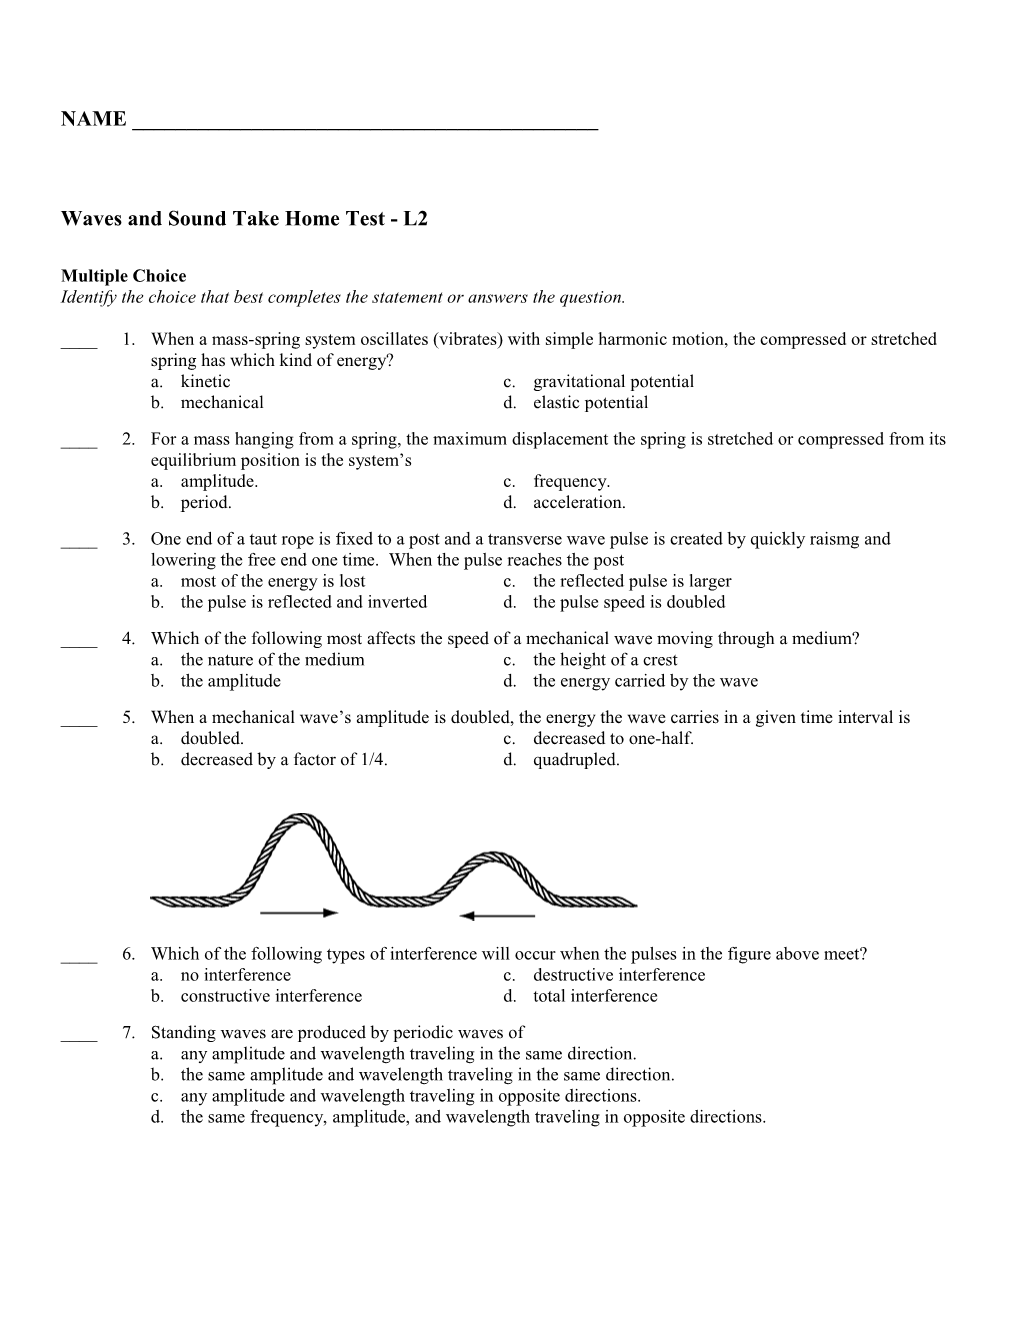 Waves and Sound Take Home Test - L2